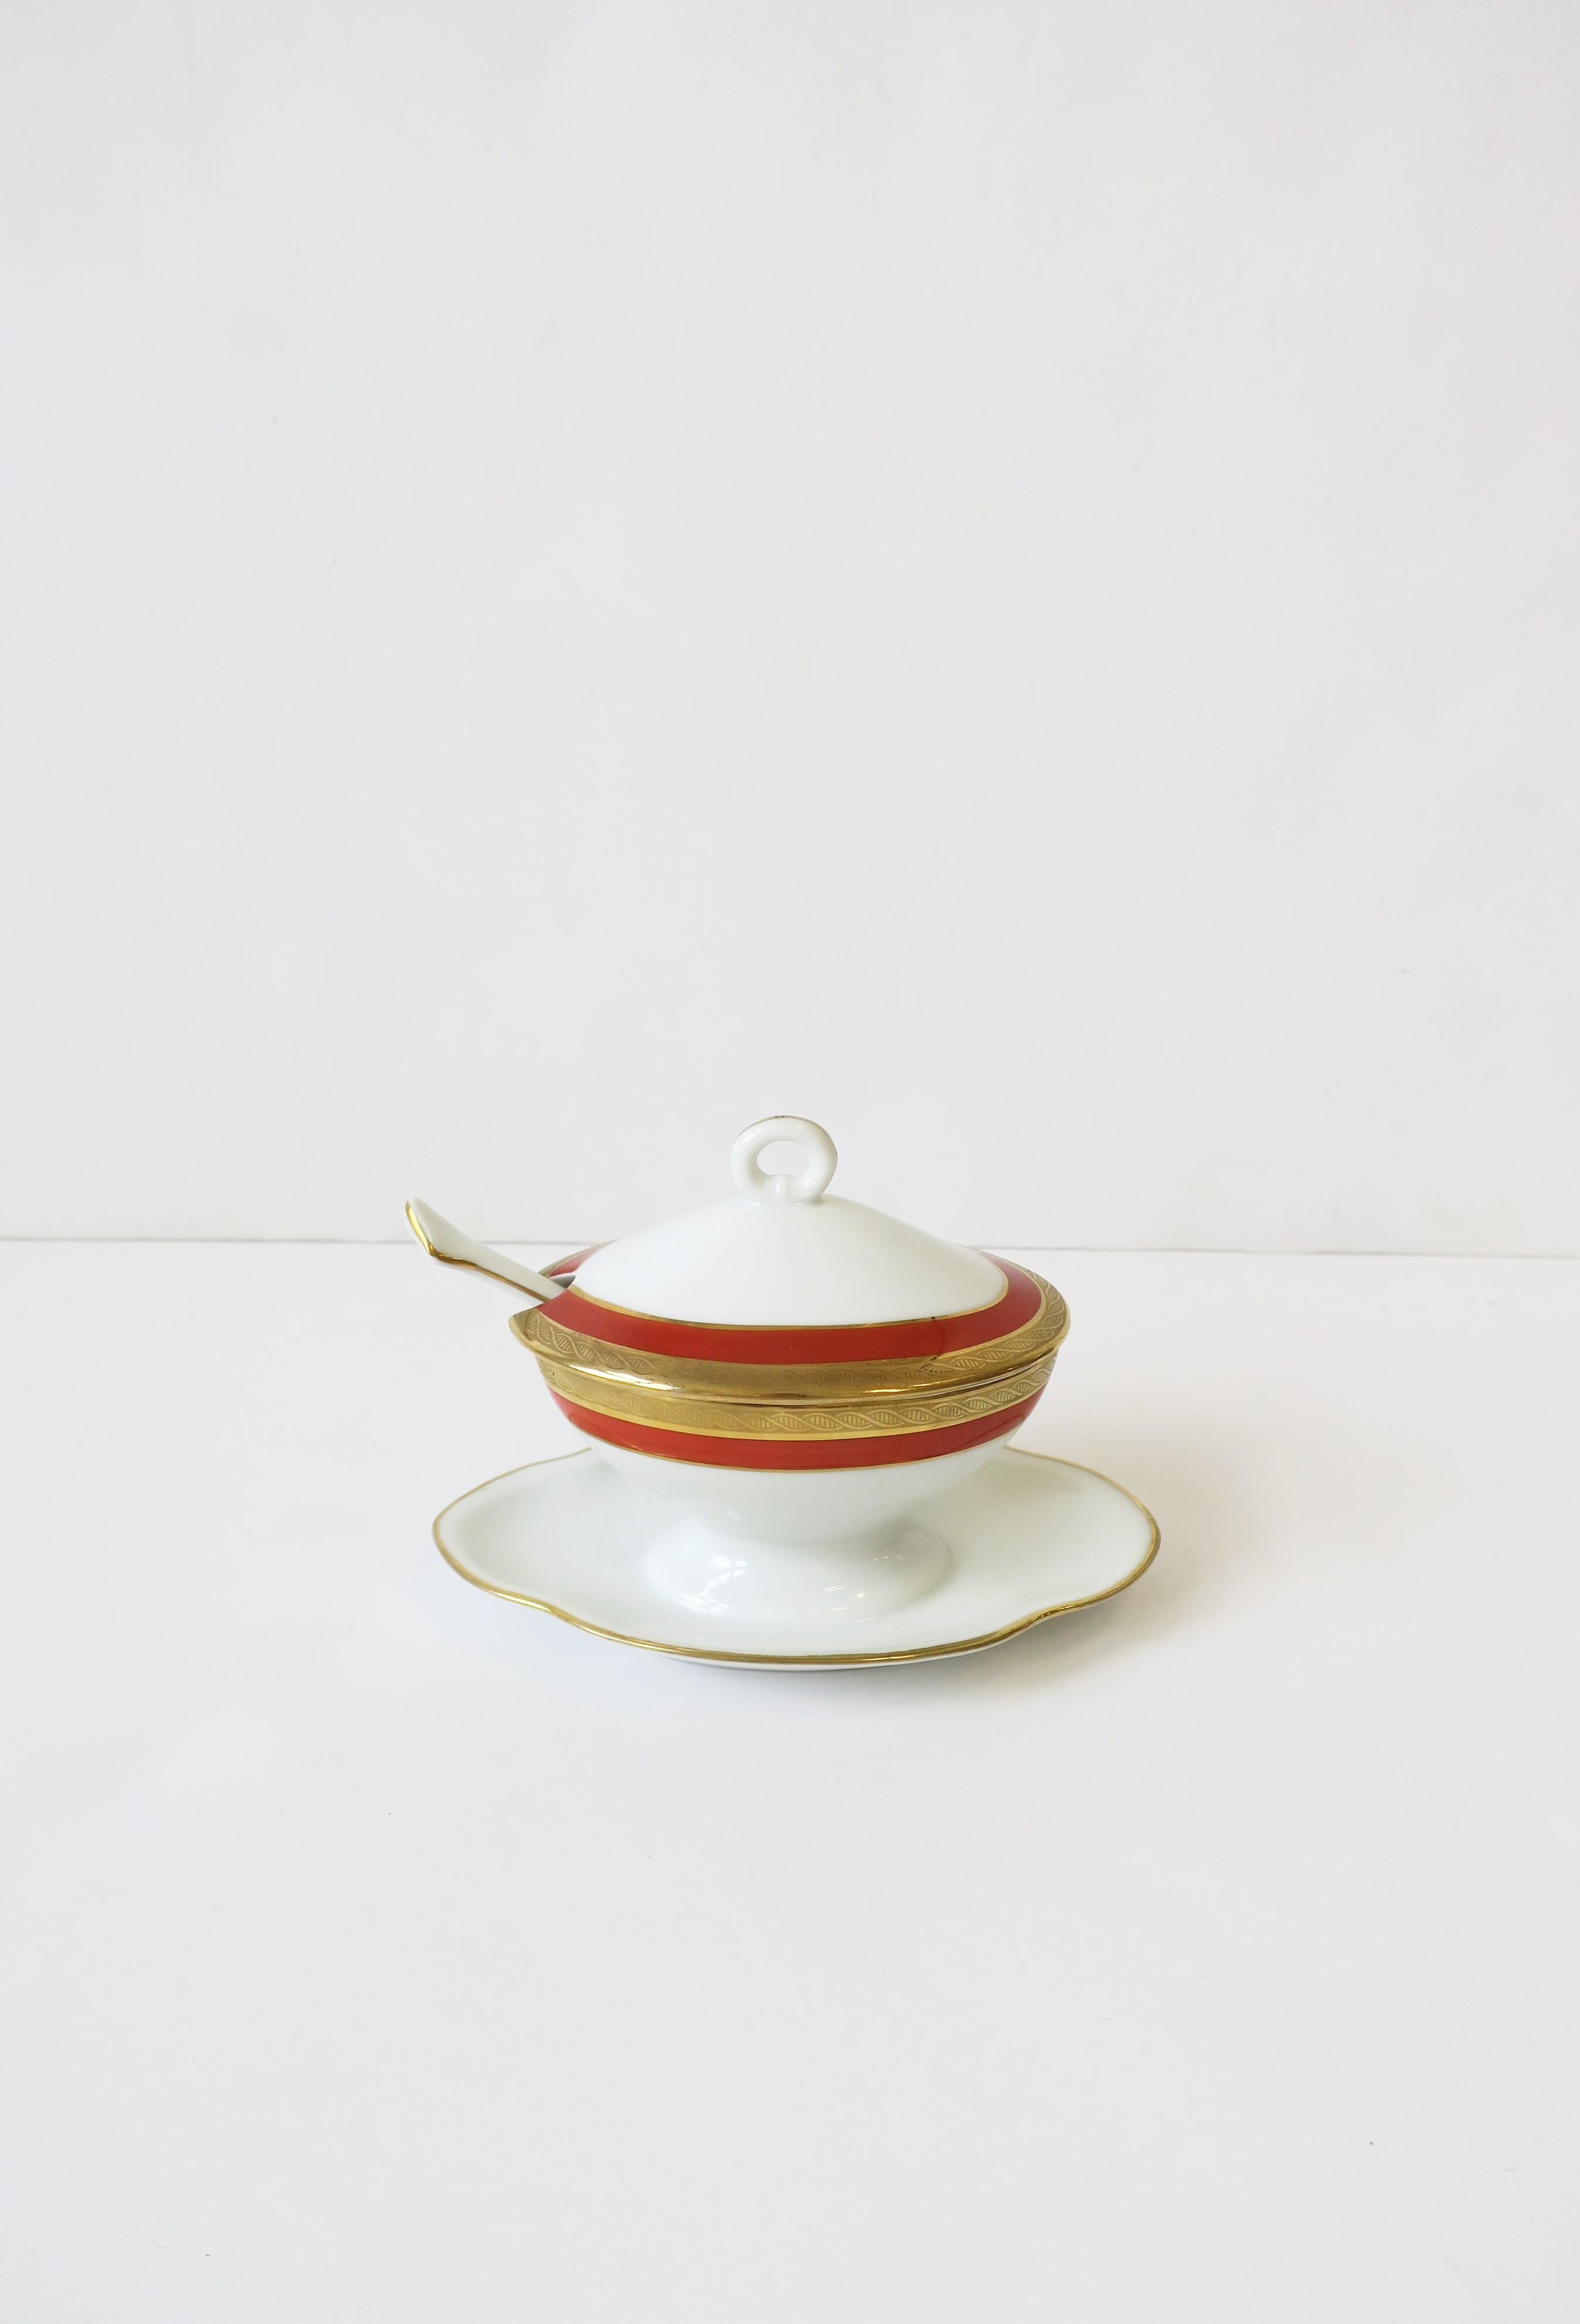 Richard Ginori Italian White and Gold Porcelain Condiment Dish & Spoon  In Good Condition For Sale In New York, NY